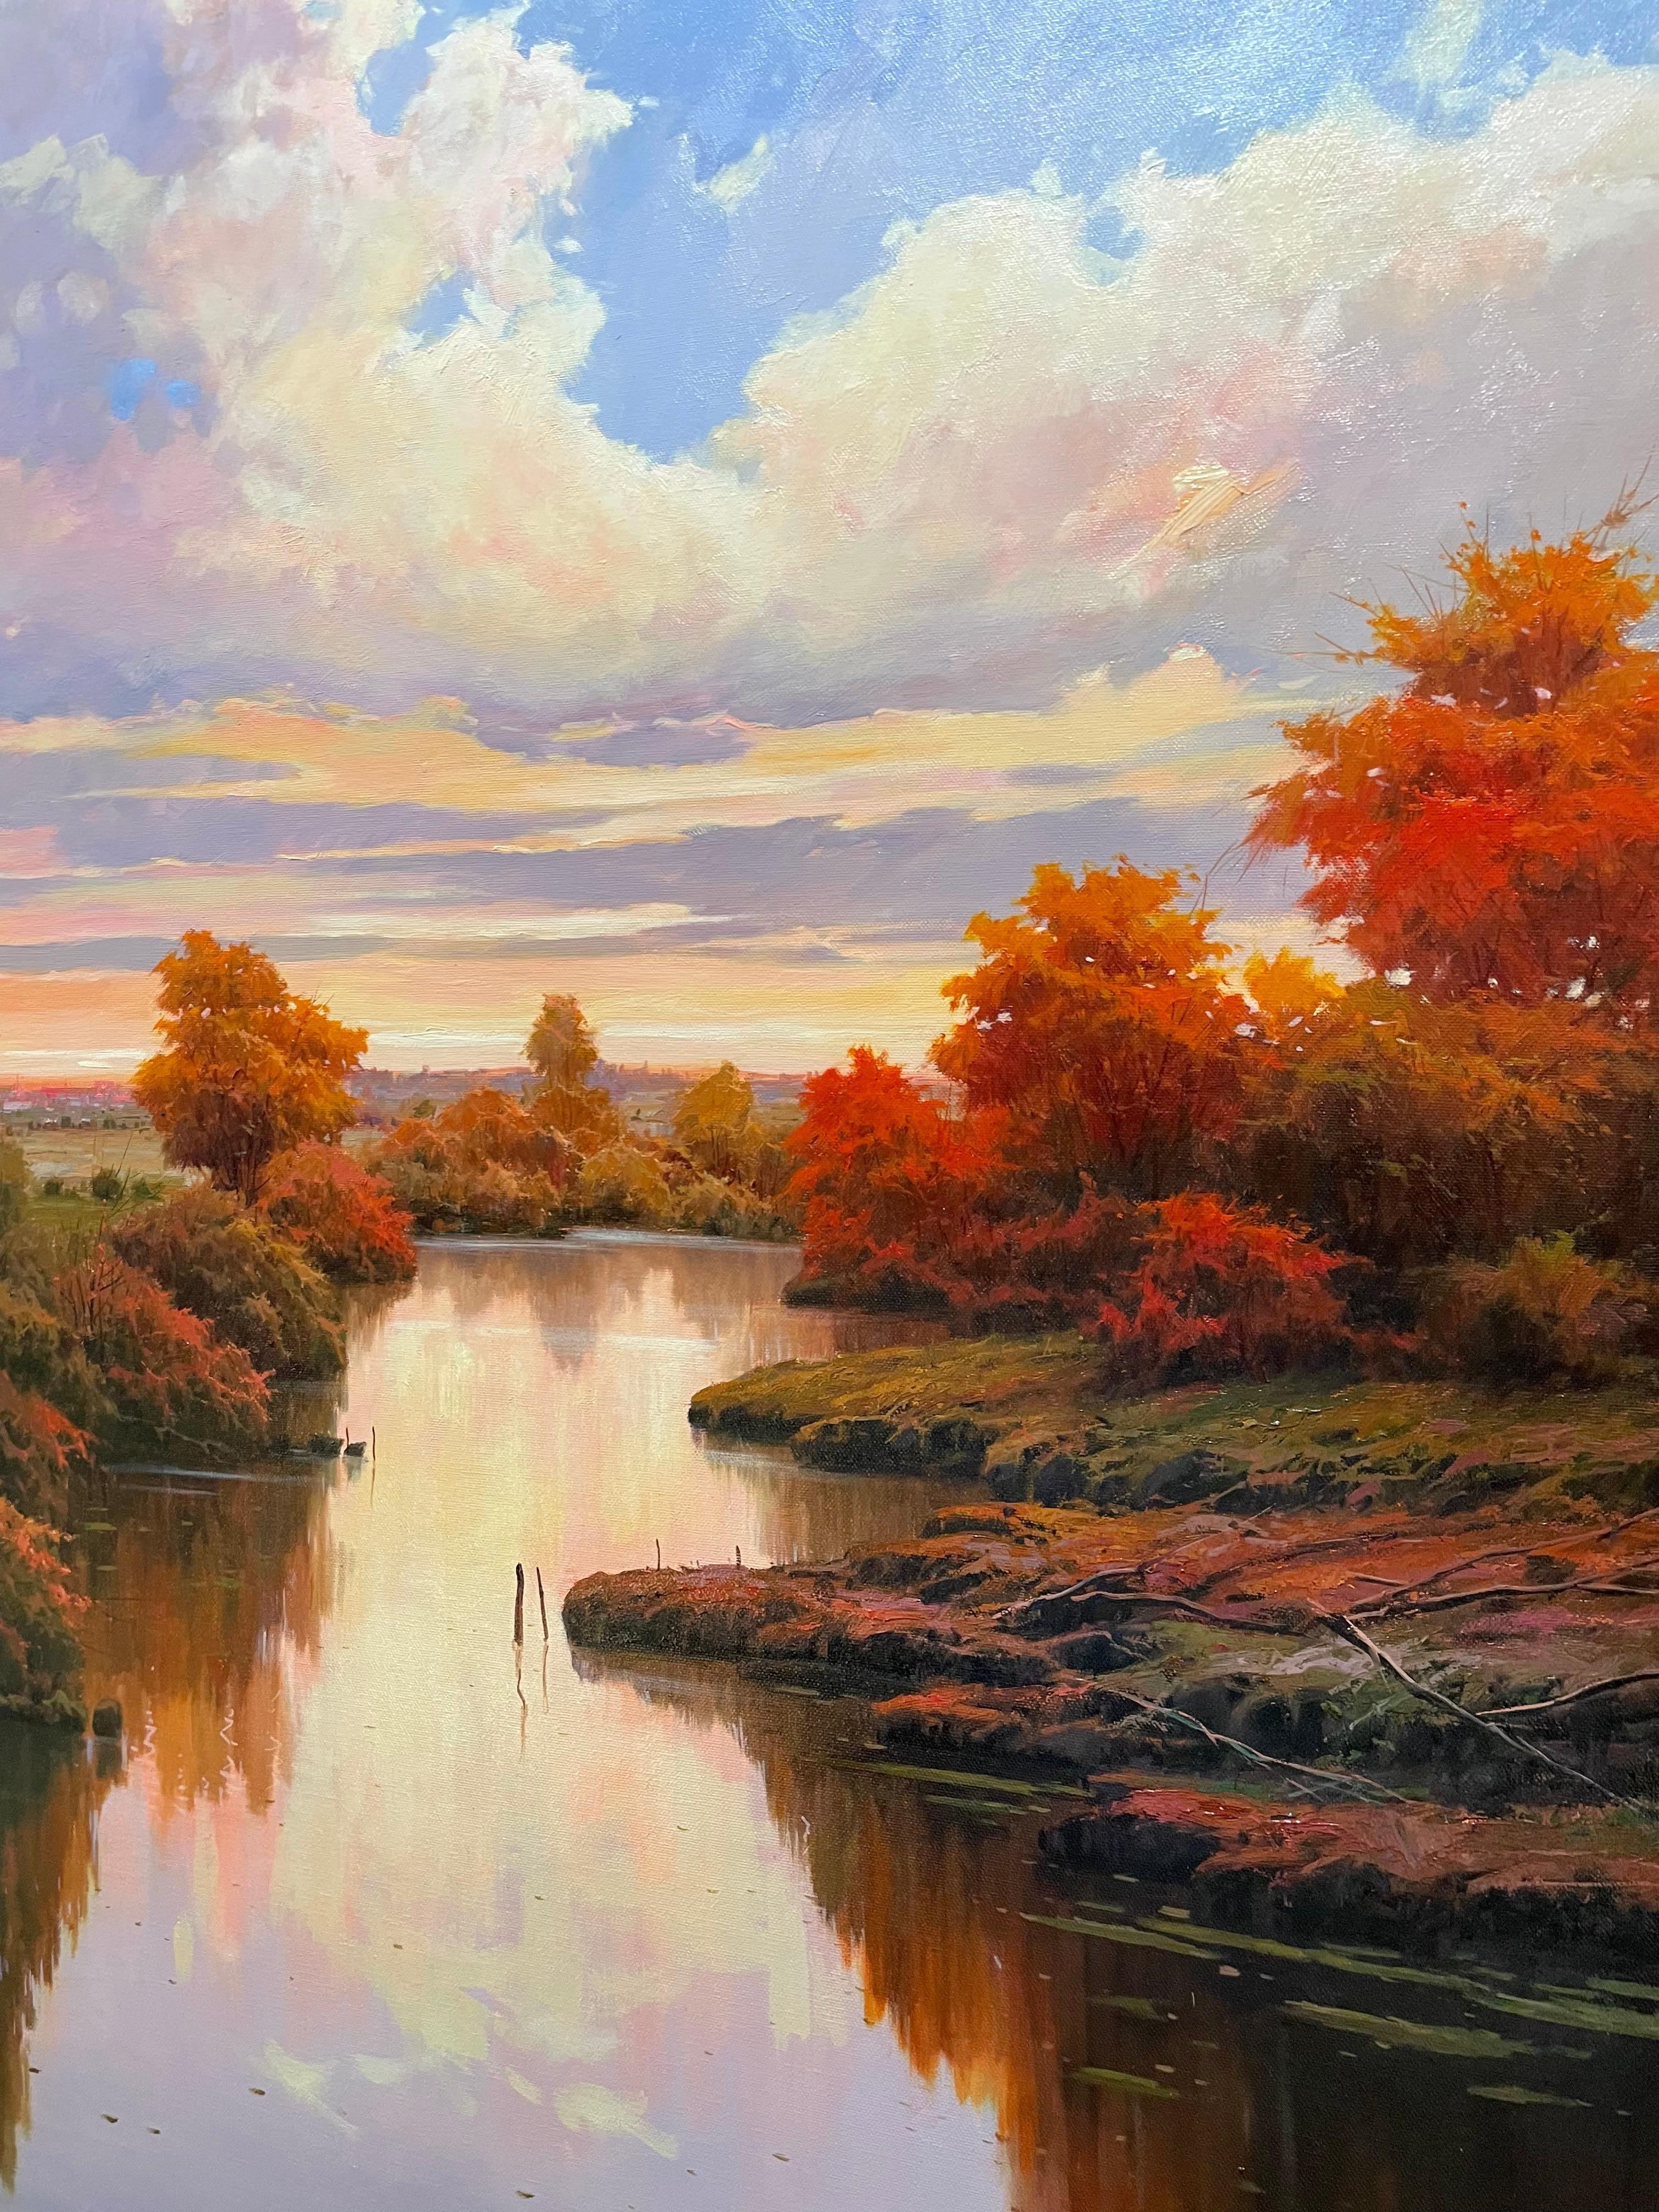 This beautiful landscape painting by Spanish painter Miguel Peidro consists of oil on canvas, is sized at 39 x 39 inches and priced at $7,650. The painting comes framed, and includes the artist's signature on the lower right corner of the